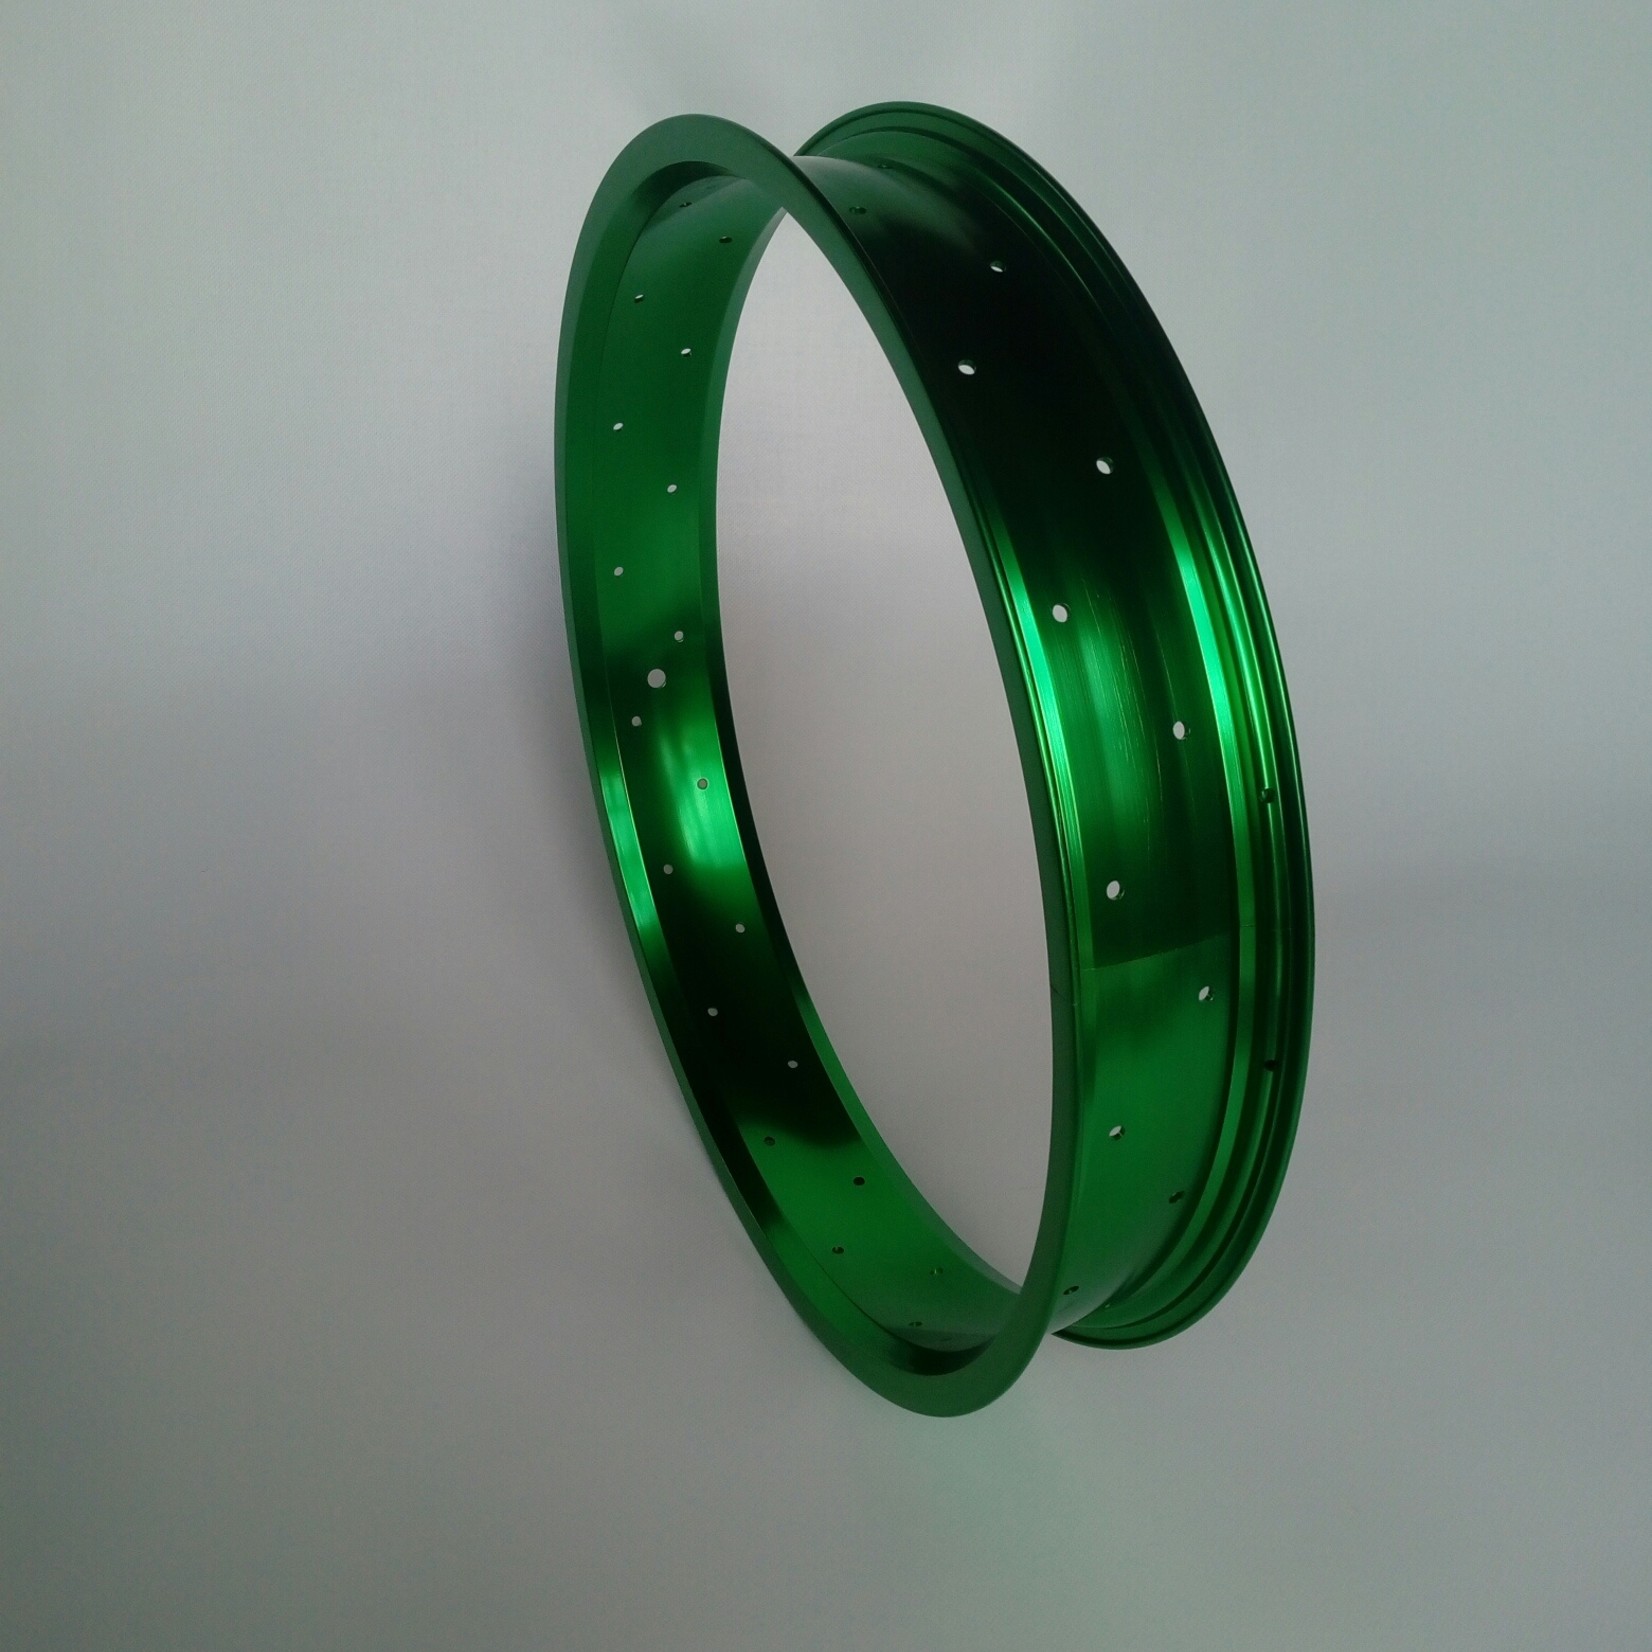 alloy rim RM65, 20", green anodized, 36 h